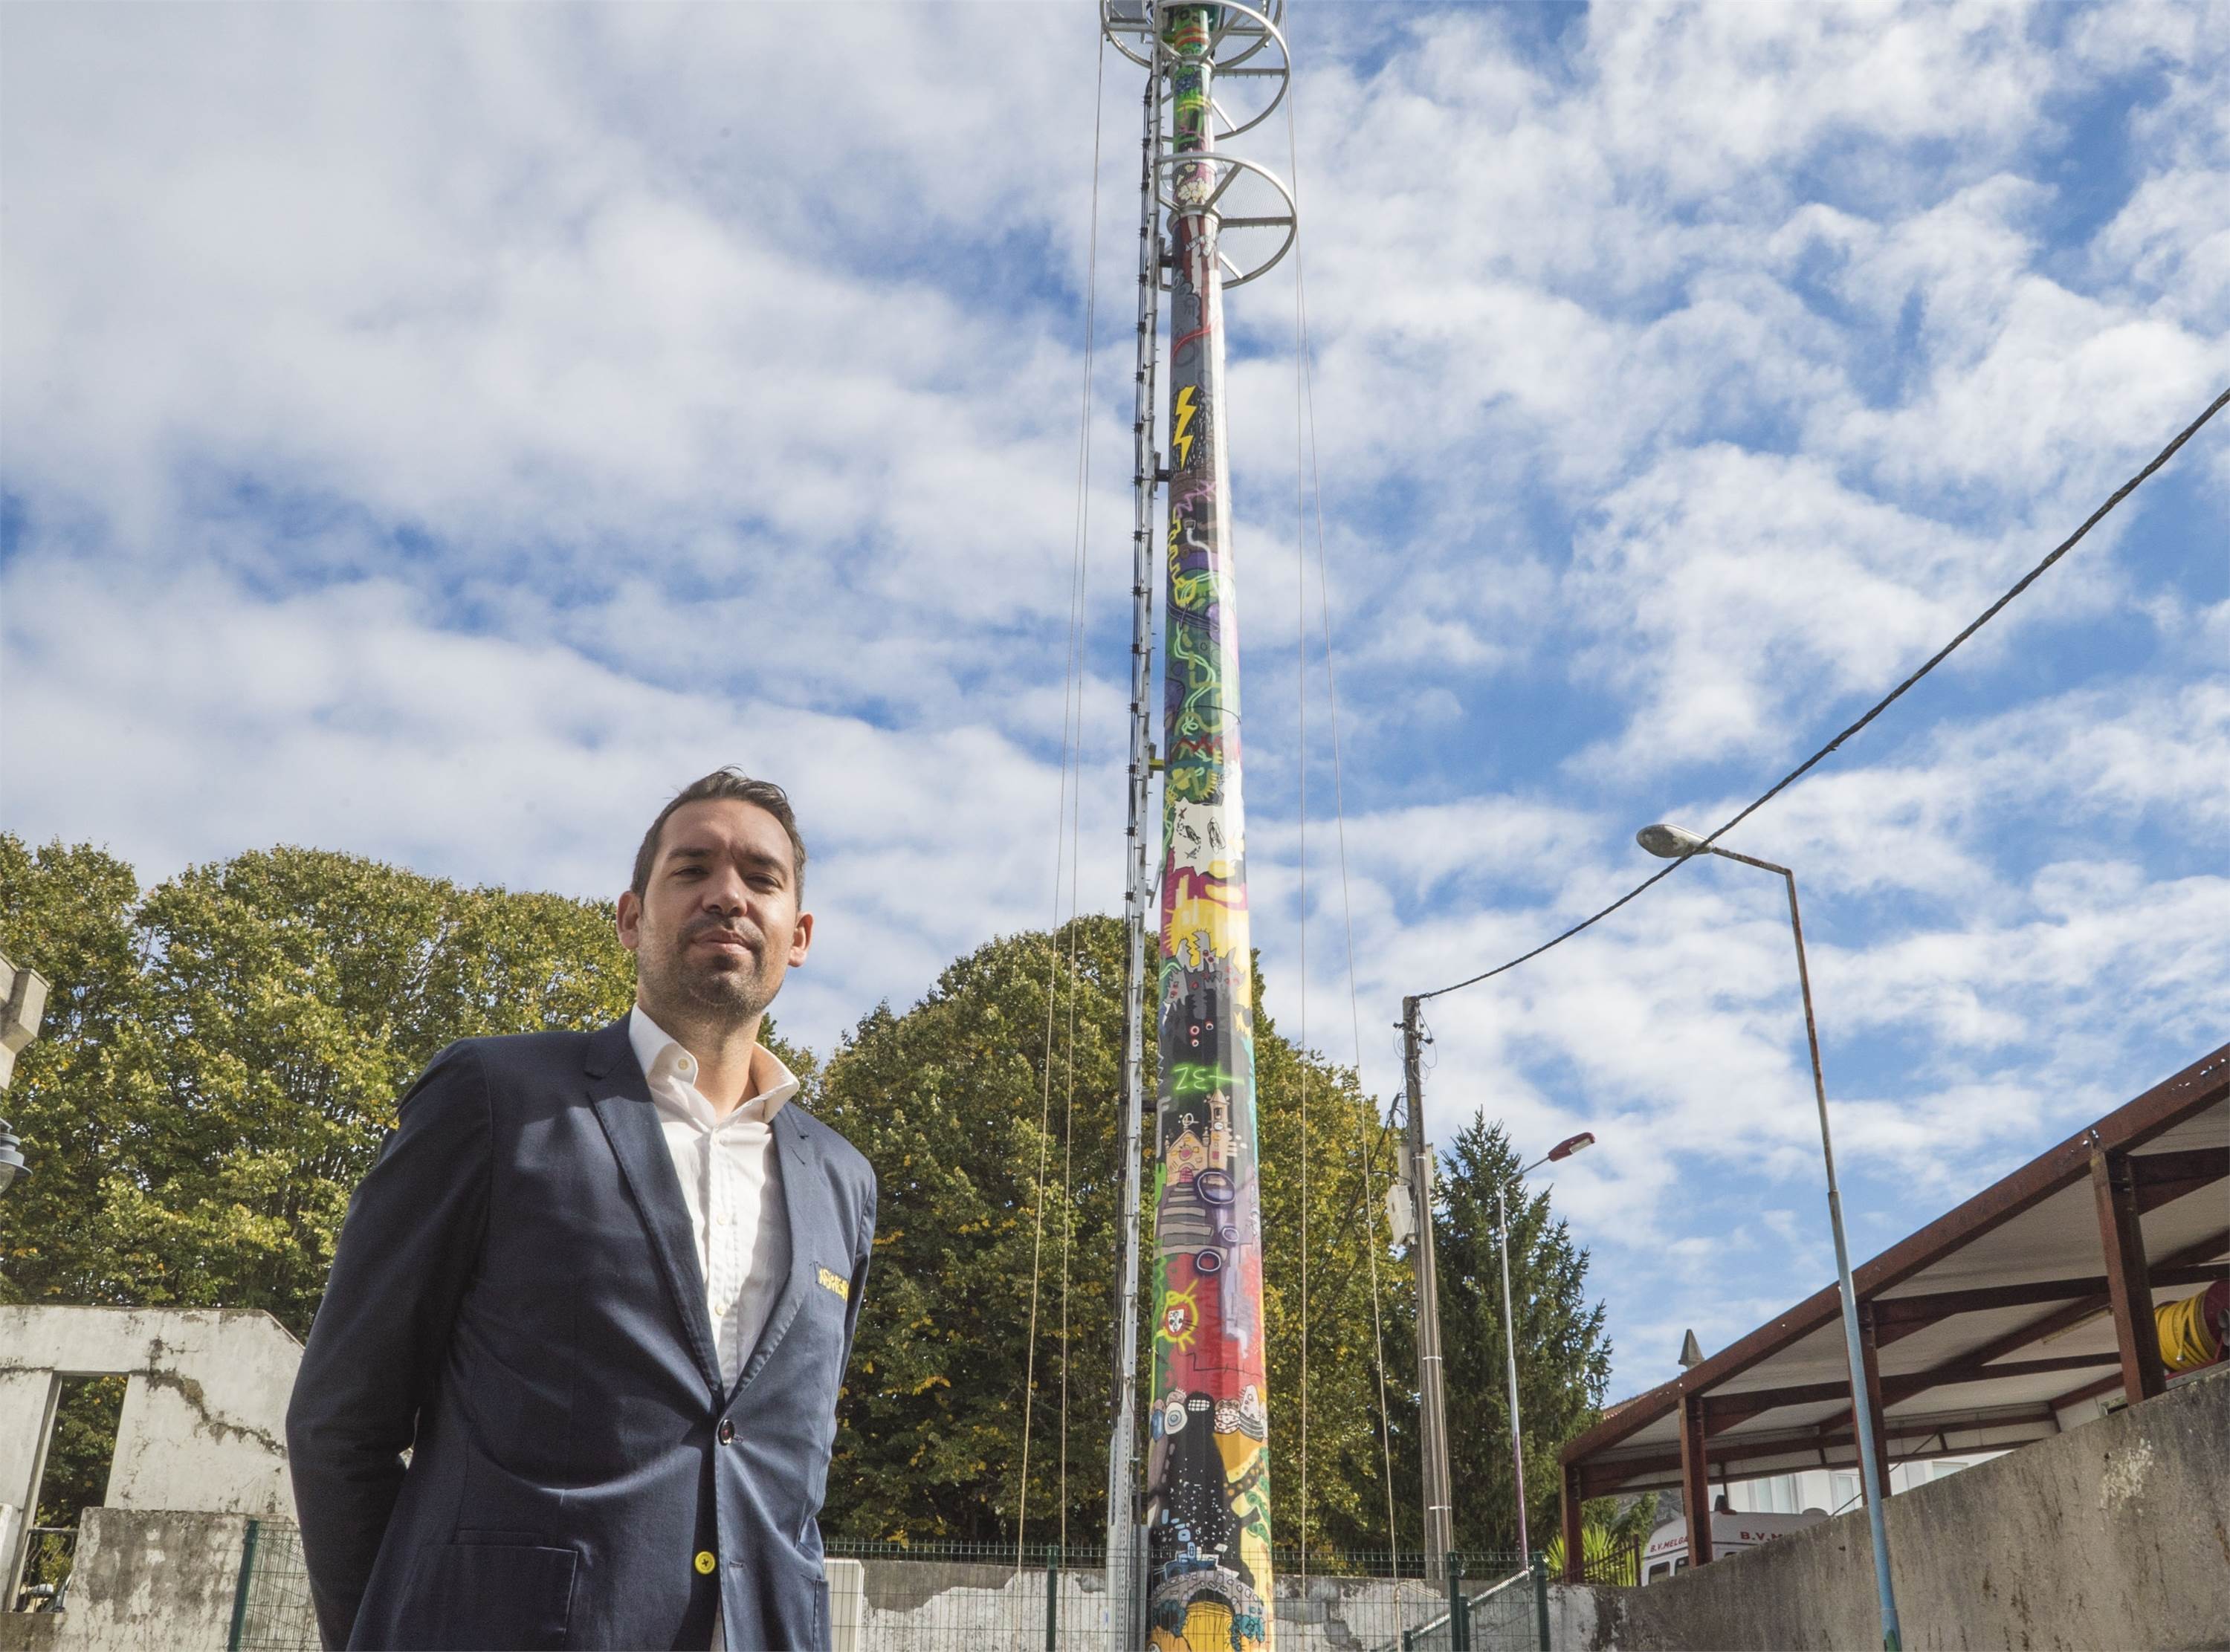 12.10.2020.  
Rafa López painted an Altice telecommunications antenna with 20 meters high. The Andalusian artist sought to integrate elements of the identity of Melgaço and its people into the artwork. The challenge for Rafa López, in Melgaço, was double: to integrate that territory in its aesthetics and turn the artwork into a public space. Altice was the ideal partner in welcoming the artist and the 12th of October emerges as a premonitory date for the first, hopefully of many, to add art to the technologies that connect communities to the world. It was the day that Christopher Columbus, who left Seville, arrived in the Americas. In that frontier place, that same day, we make art reach the skies.